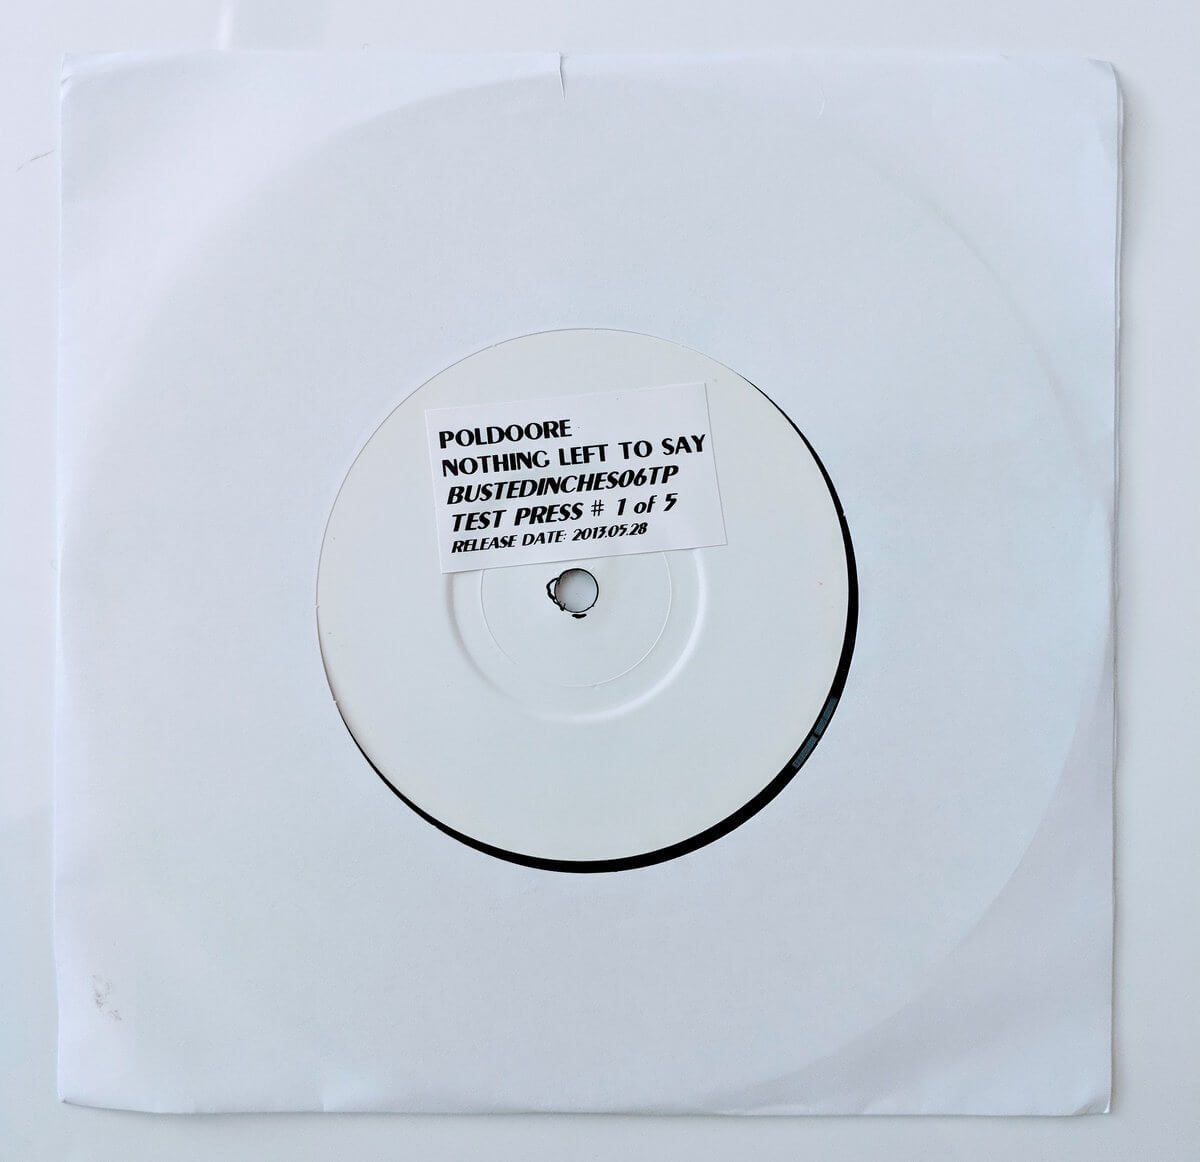 Poldoore - Nothing Left To Say - Limited Edition 7 Inch Vinyl Test Pressing - Cold Busted